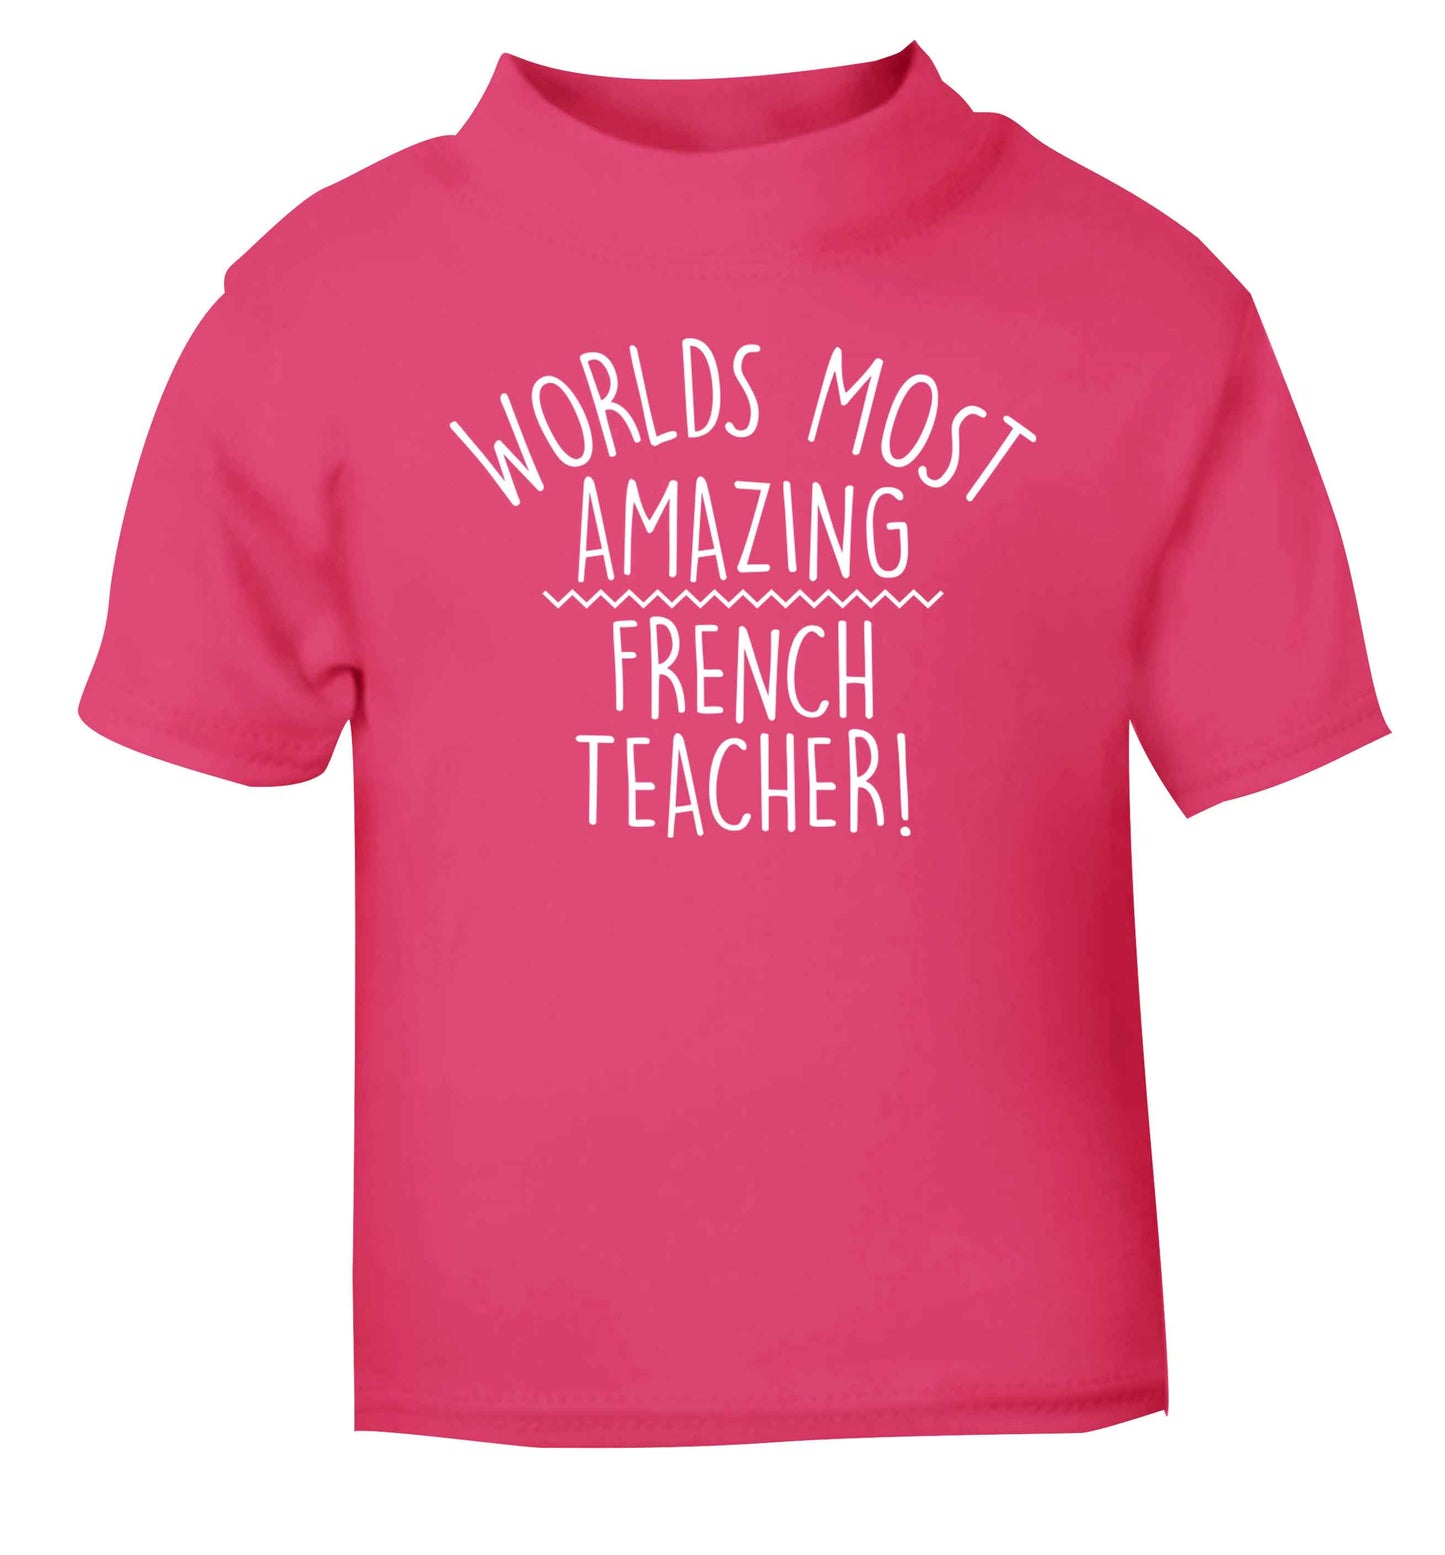 Worlds most amazing French teacher pink baby toddler Tshirt 2 Years